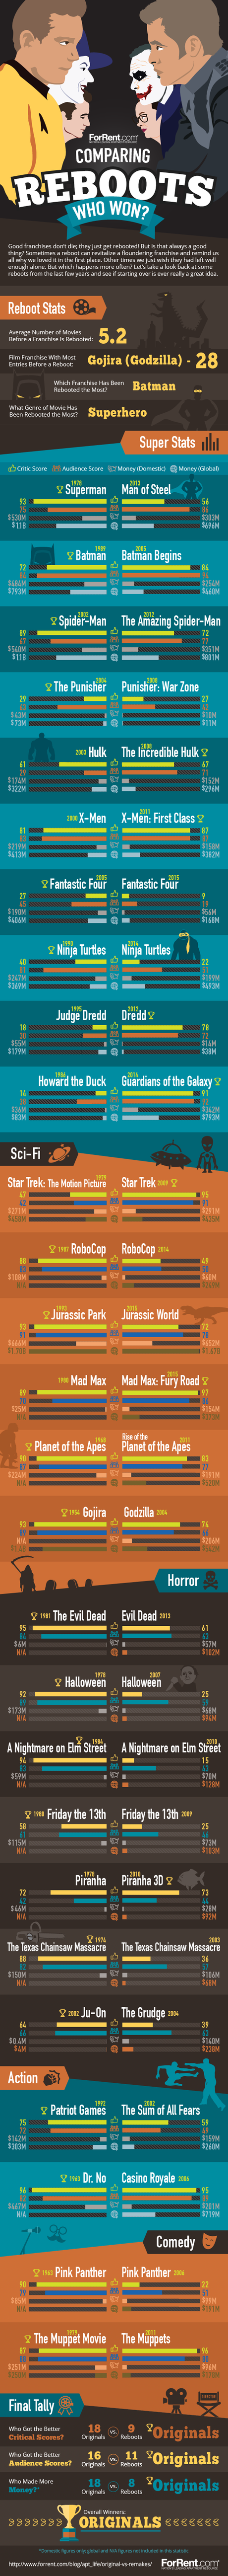 Original Movies Are Better Than Remakes/Reboots, Or So The Data Says: An Infographic